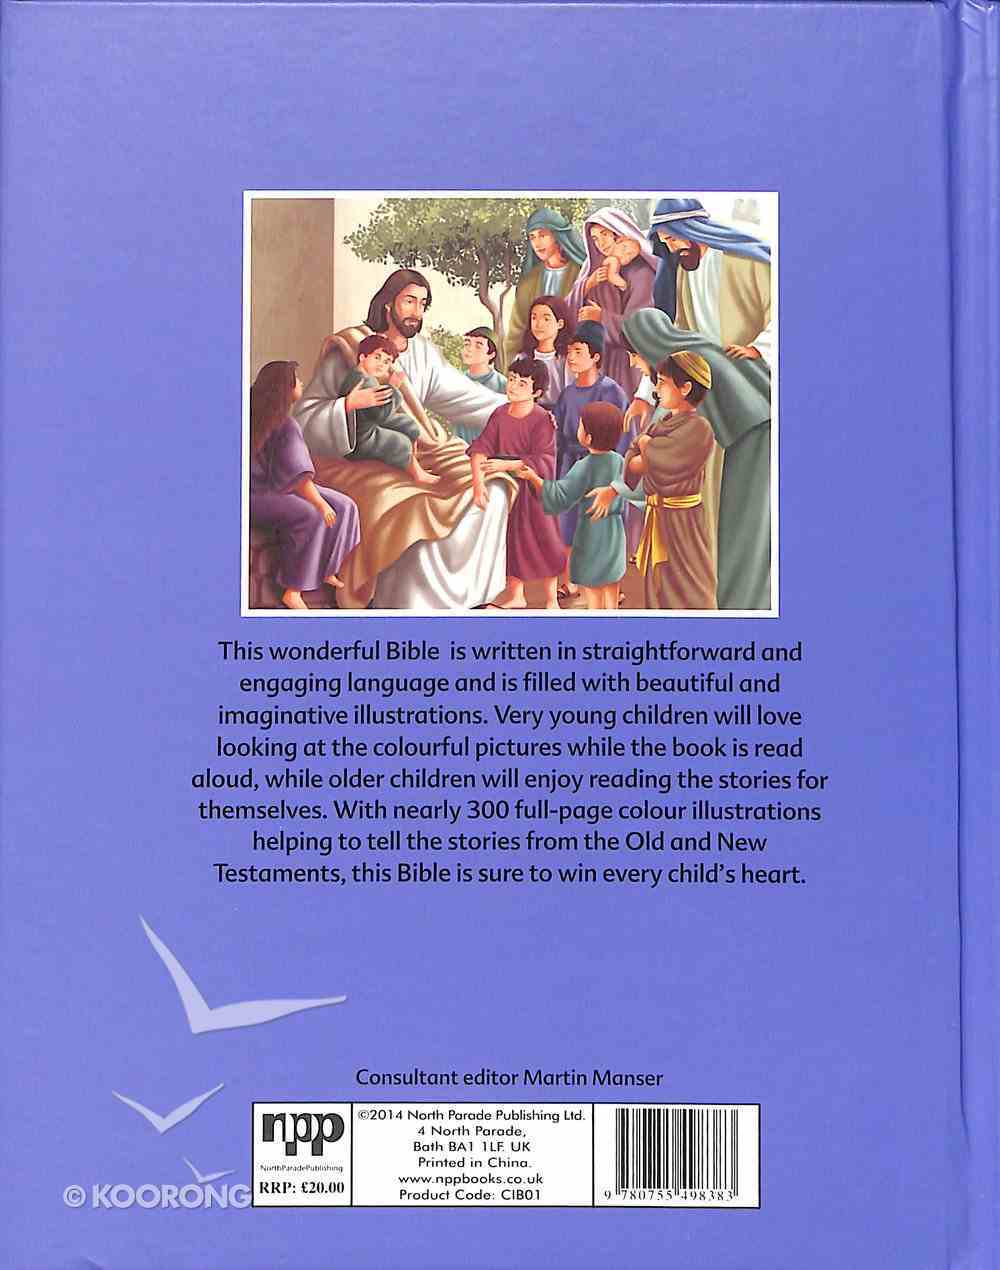 The Illustrated Children's Bible (Anglicised) Hardback